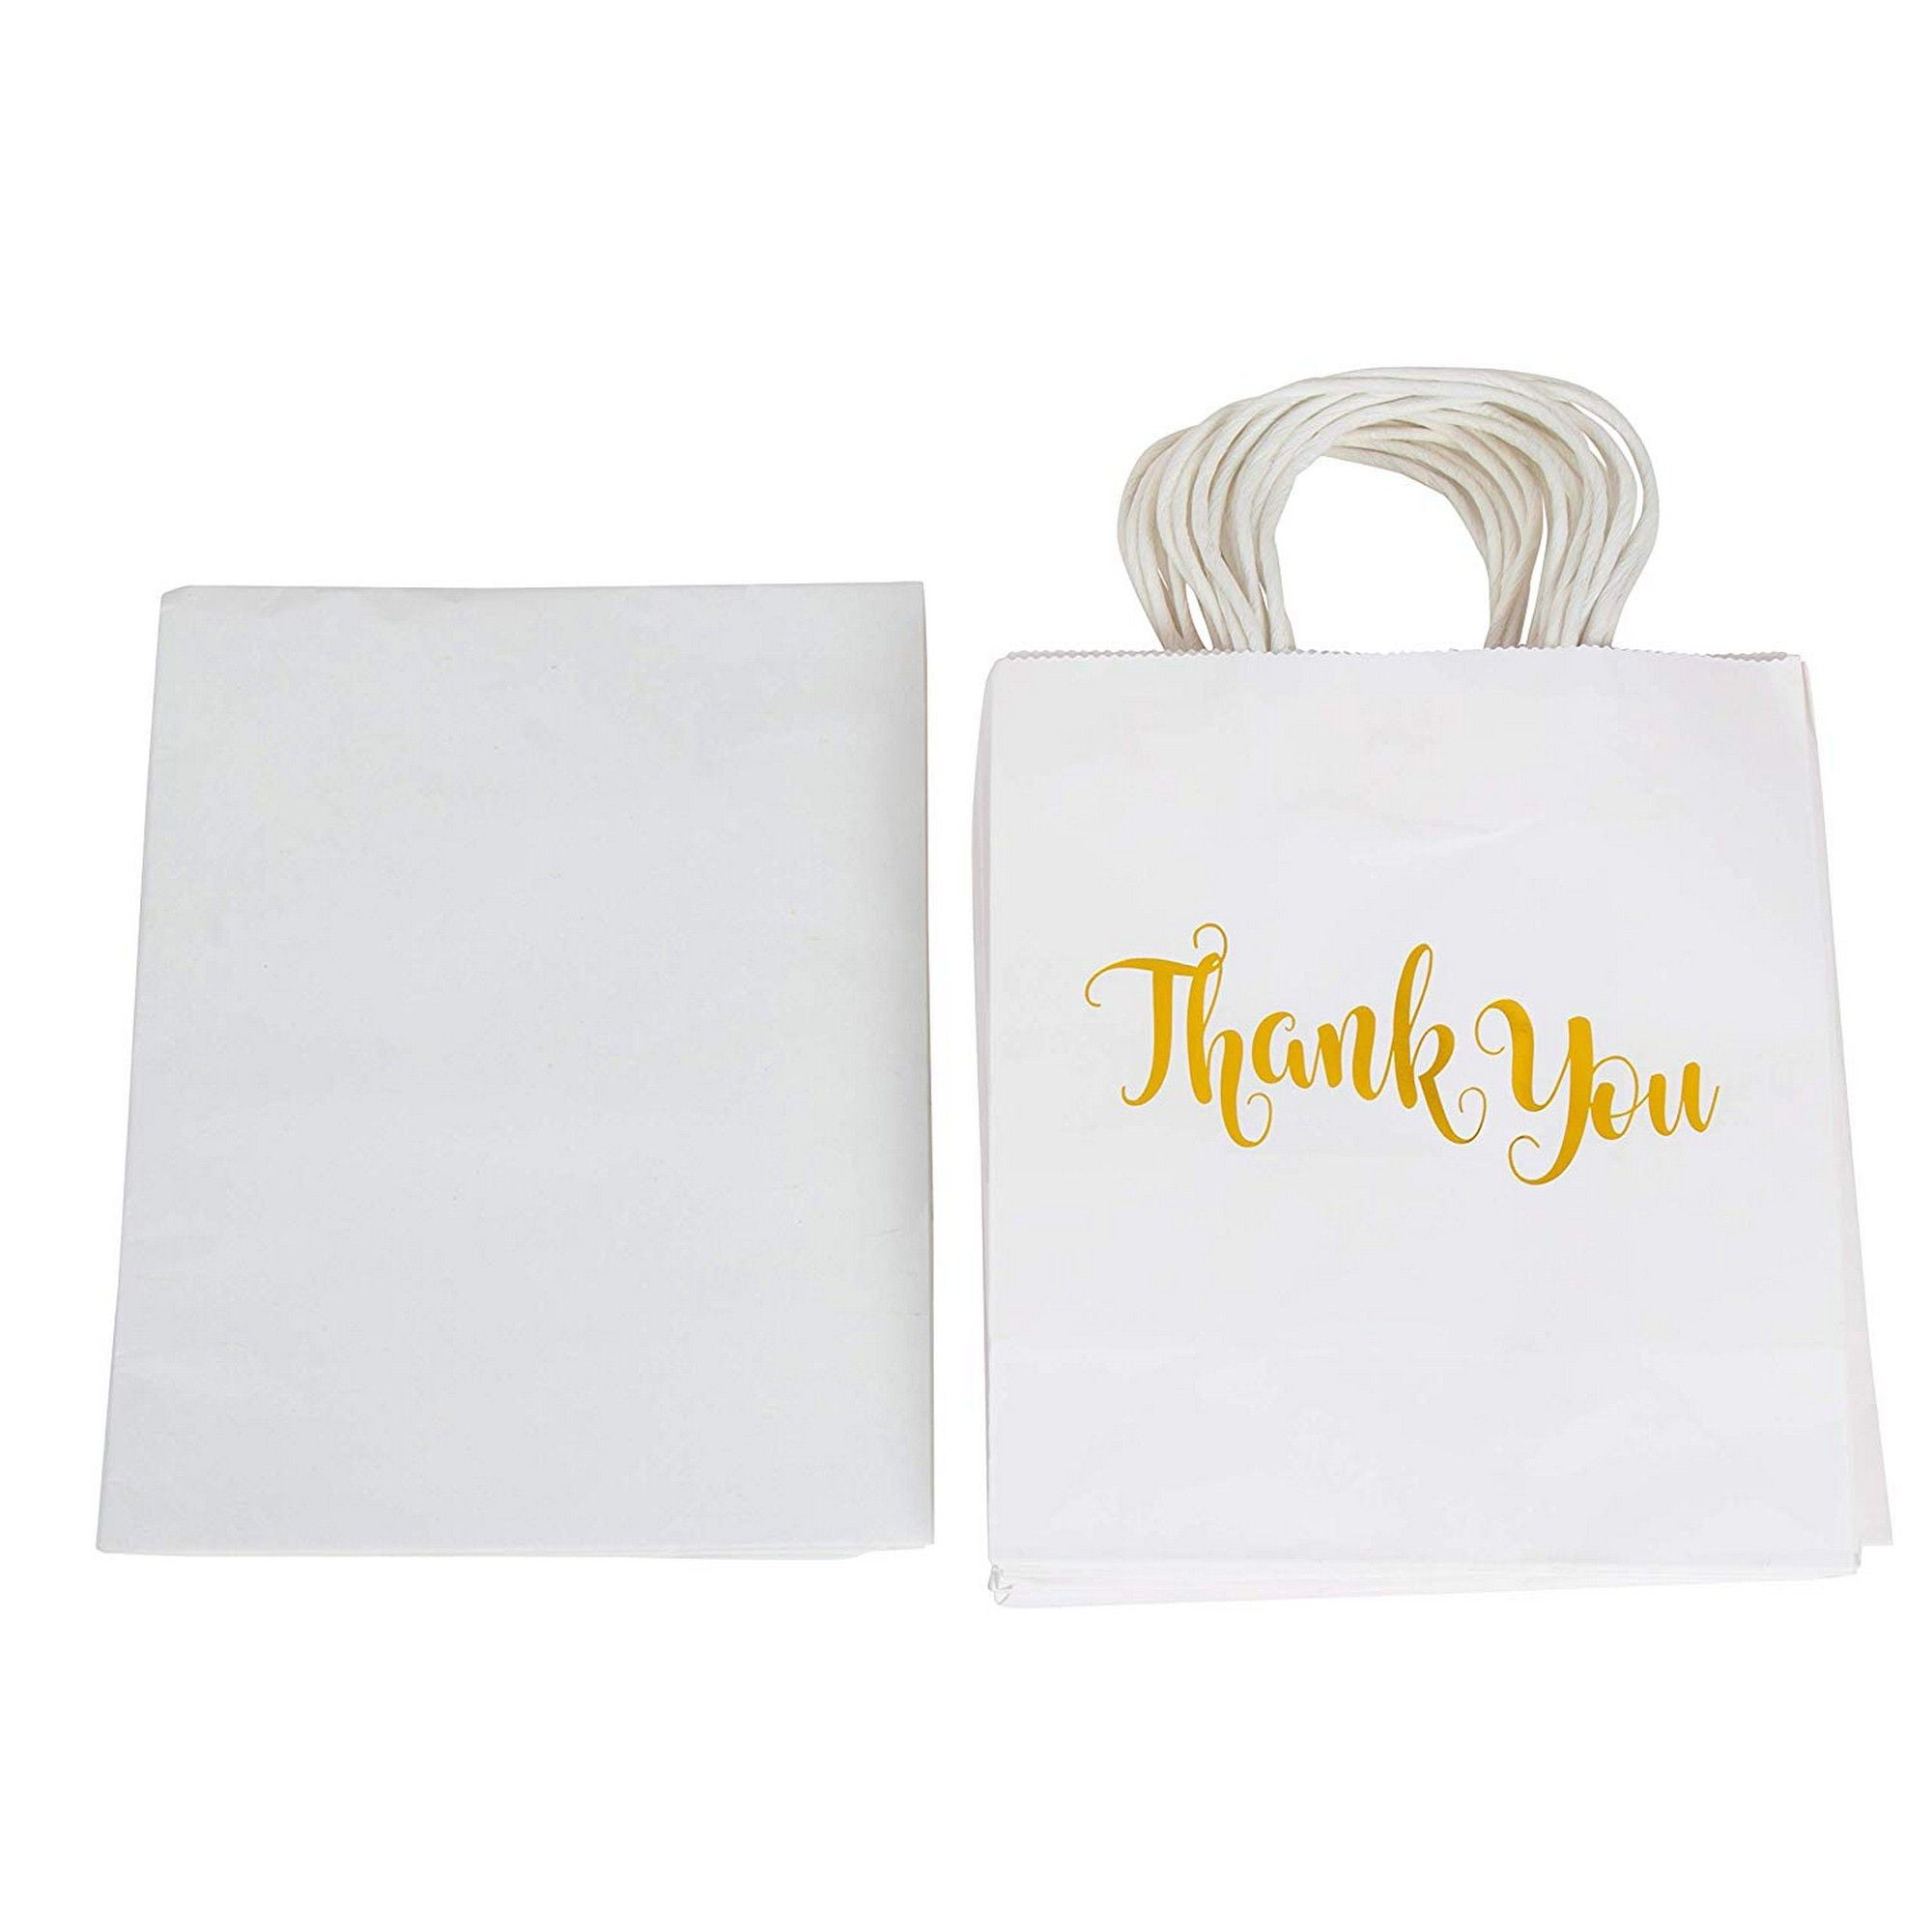 Elegant Paper Gift Bags with ‘’Thank You’’ Embossed in Rose Gold Foil Letters 12 Pack Thank You Gift Bags White Wedding Party Perfect for Birthday Party Paper Favor Bags 4x 7x 9 Inches